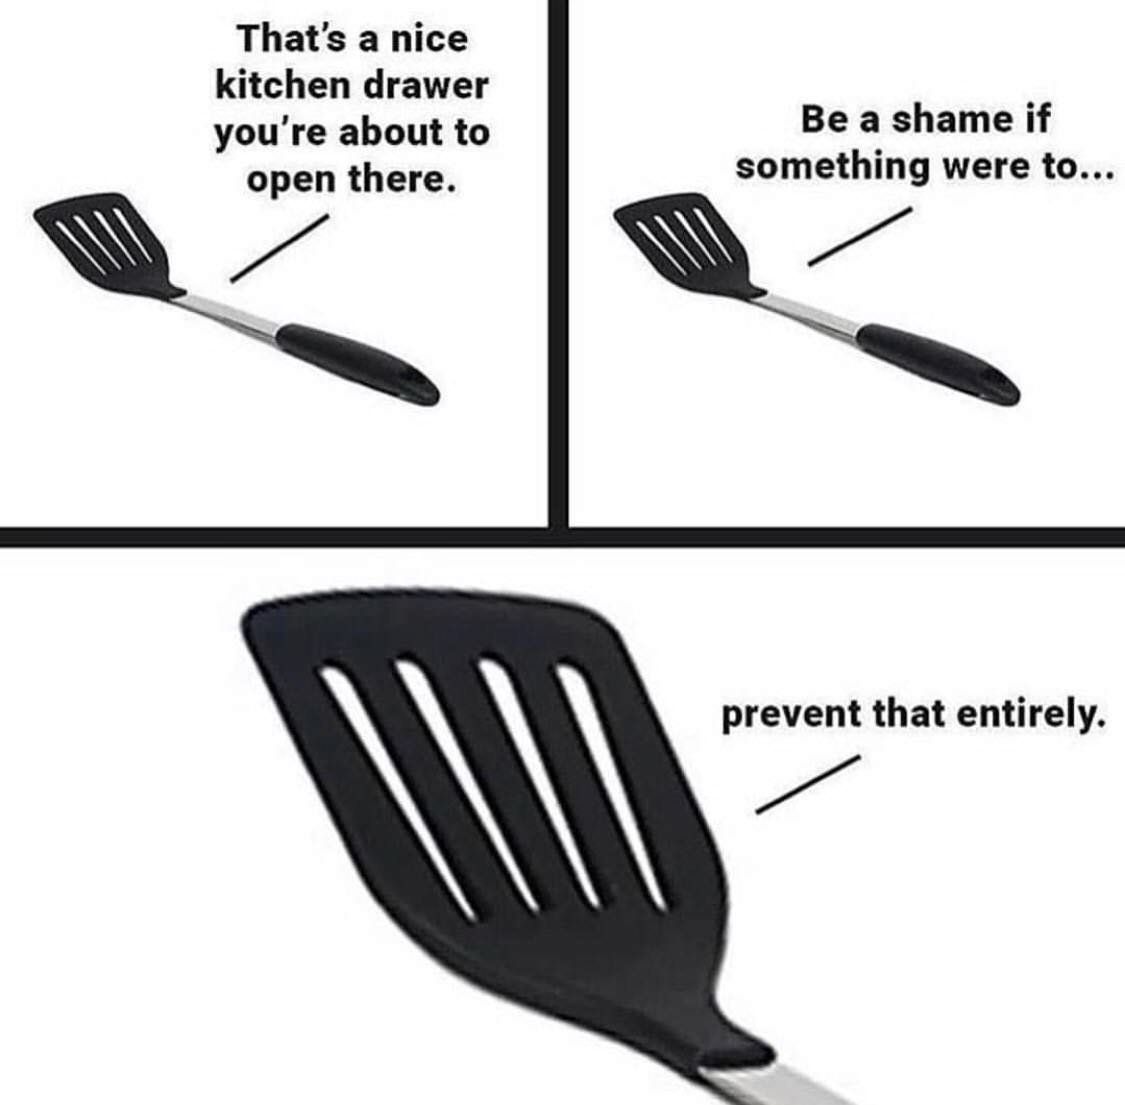 This is SPATULA